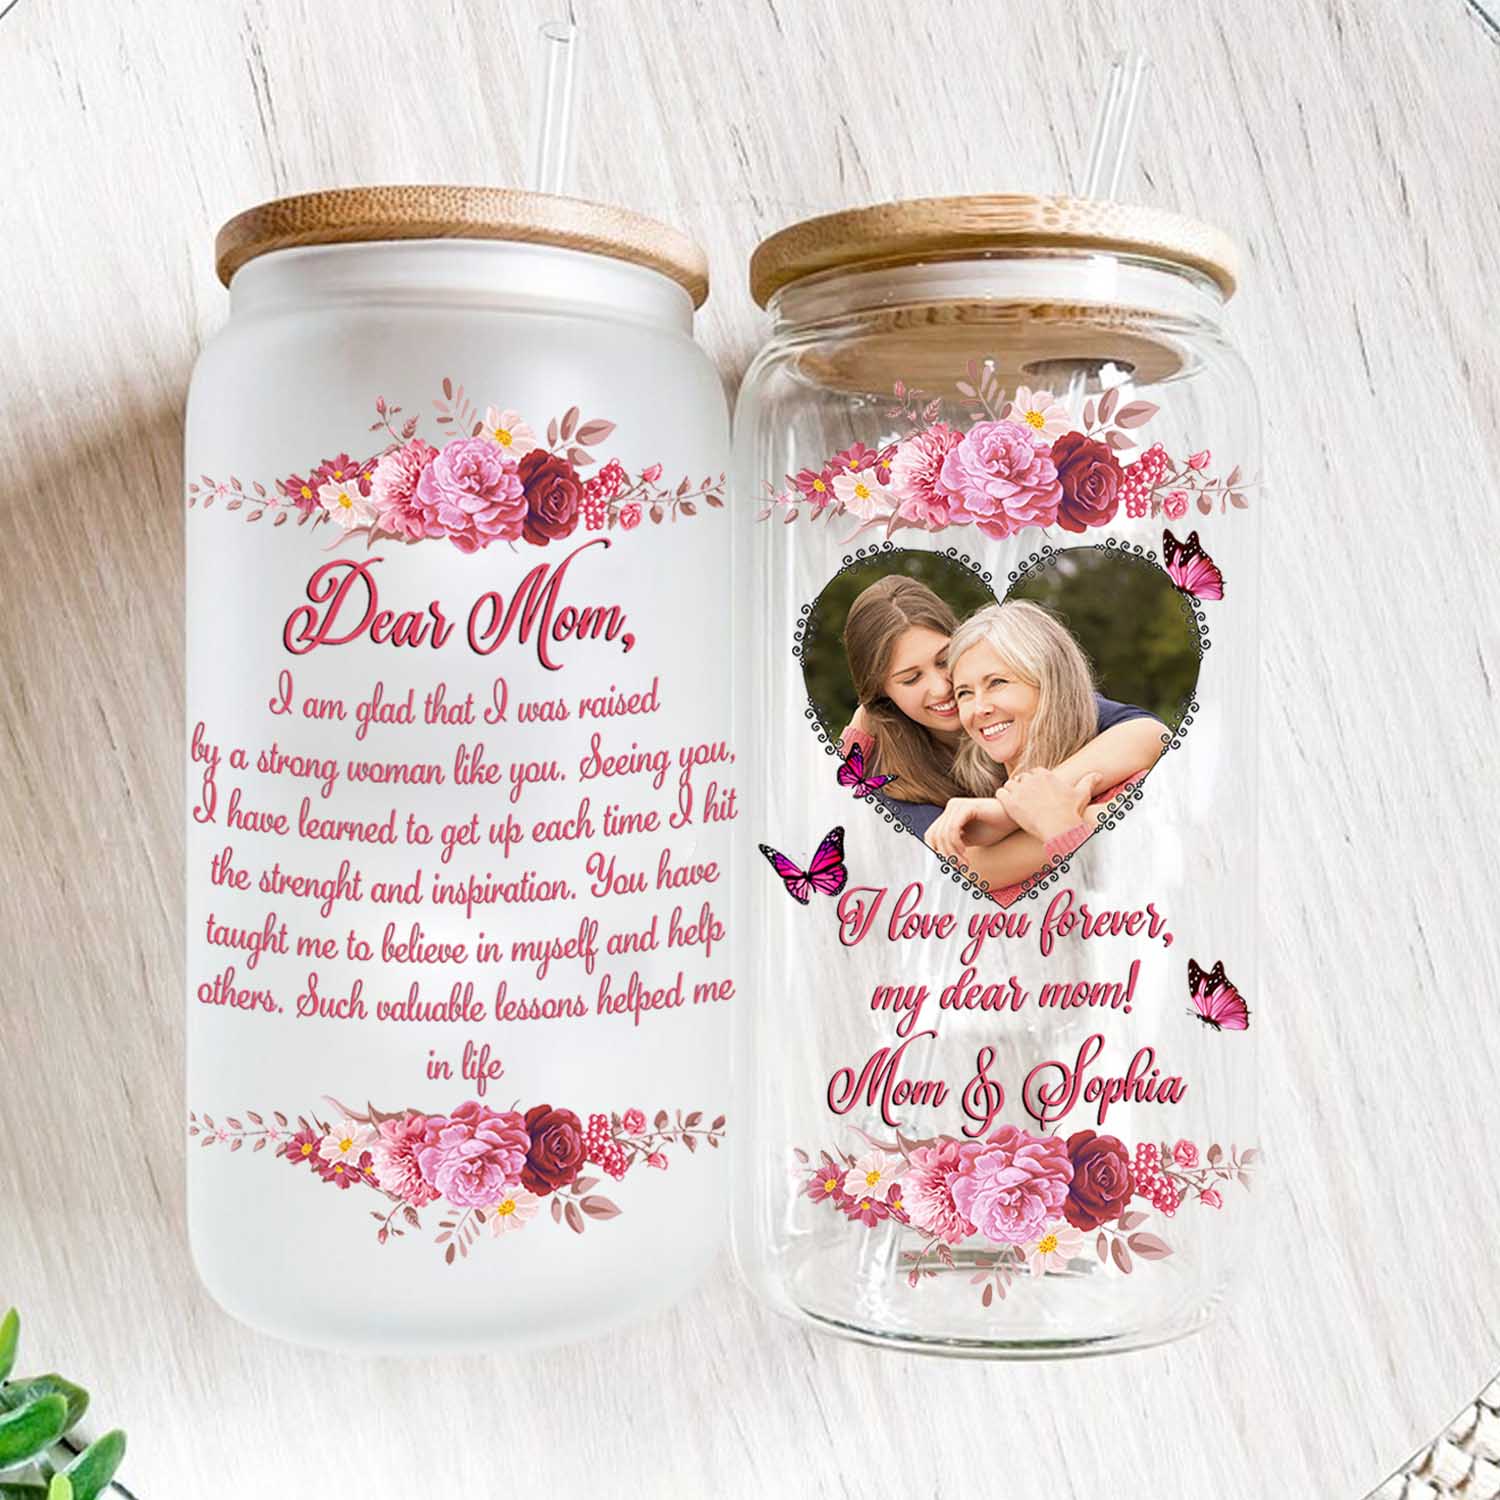 I Love You Forever My Dear Mom - Custom Photo And Names - Personalized Glass Bottle, Frosted Bottle, Gift For Family, Mother's Day